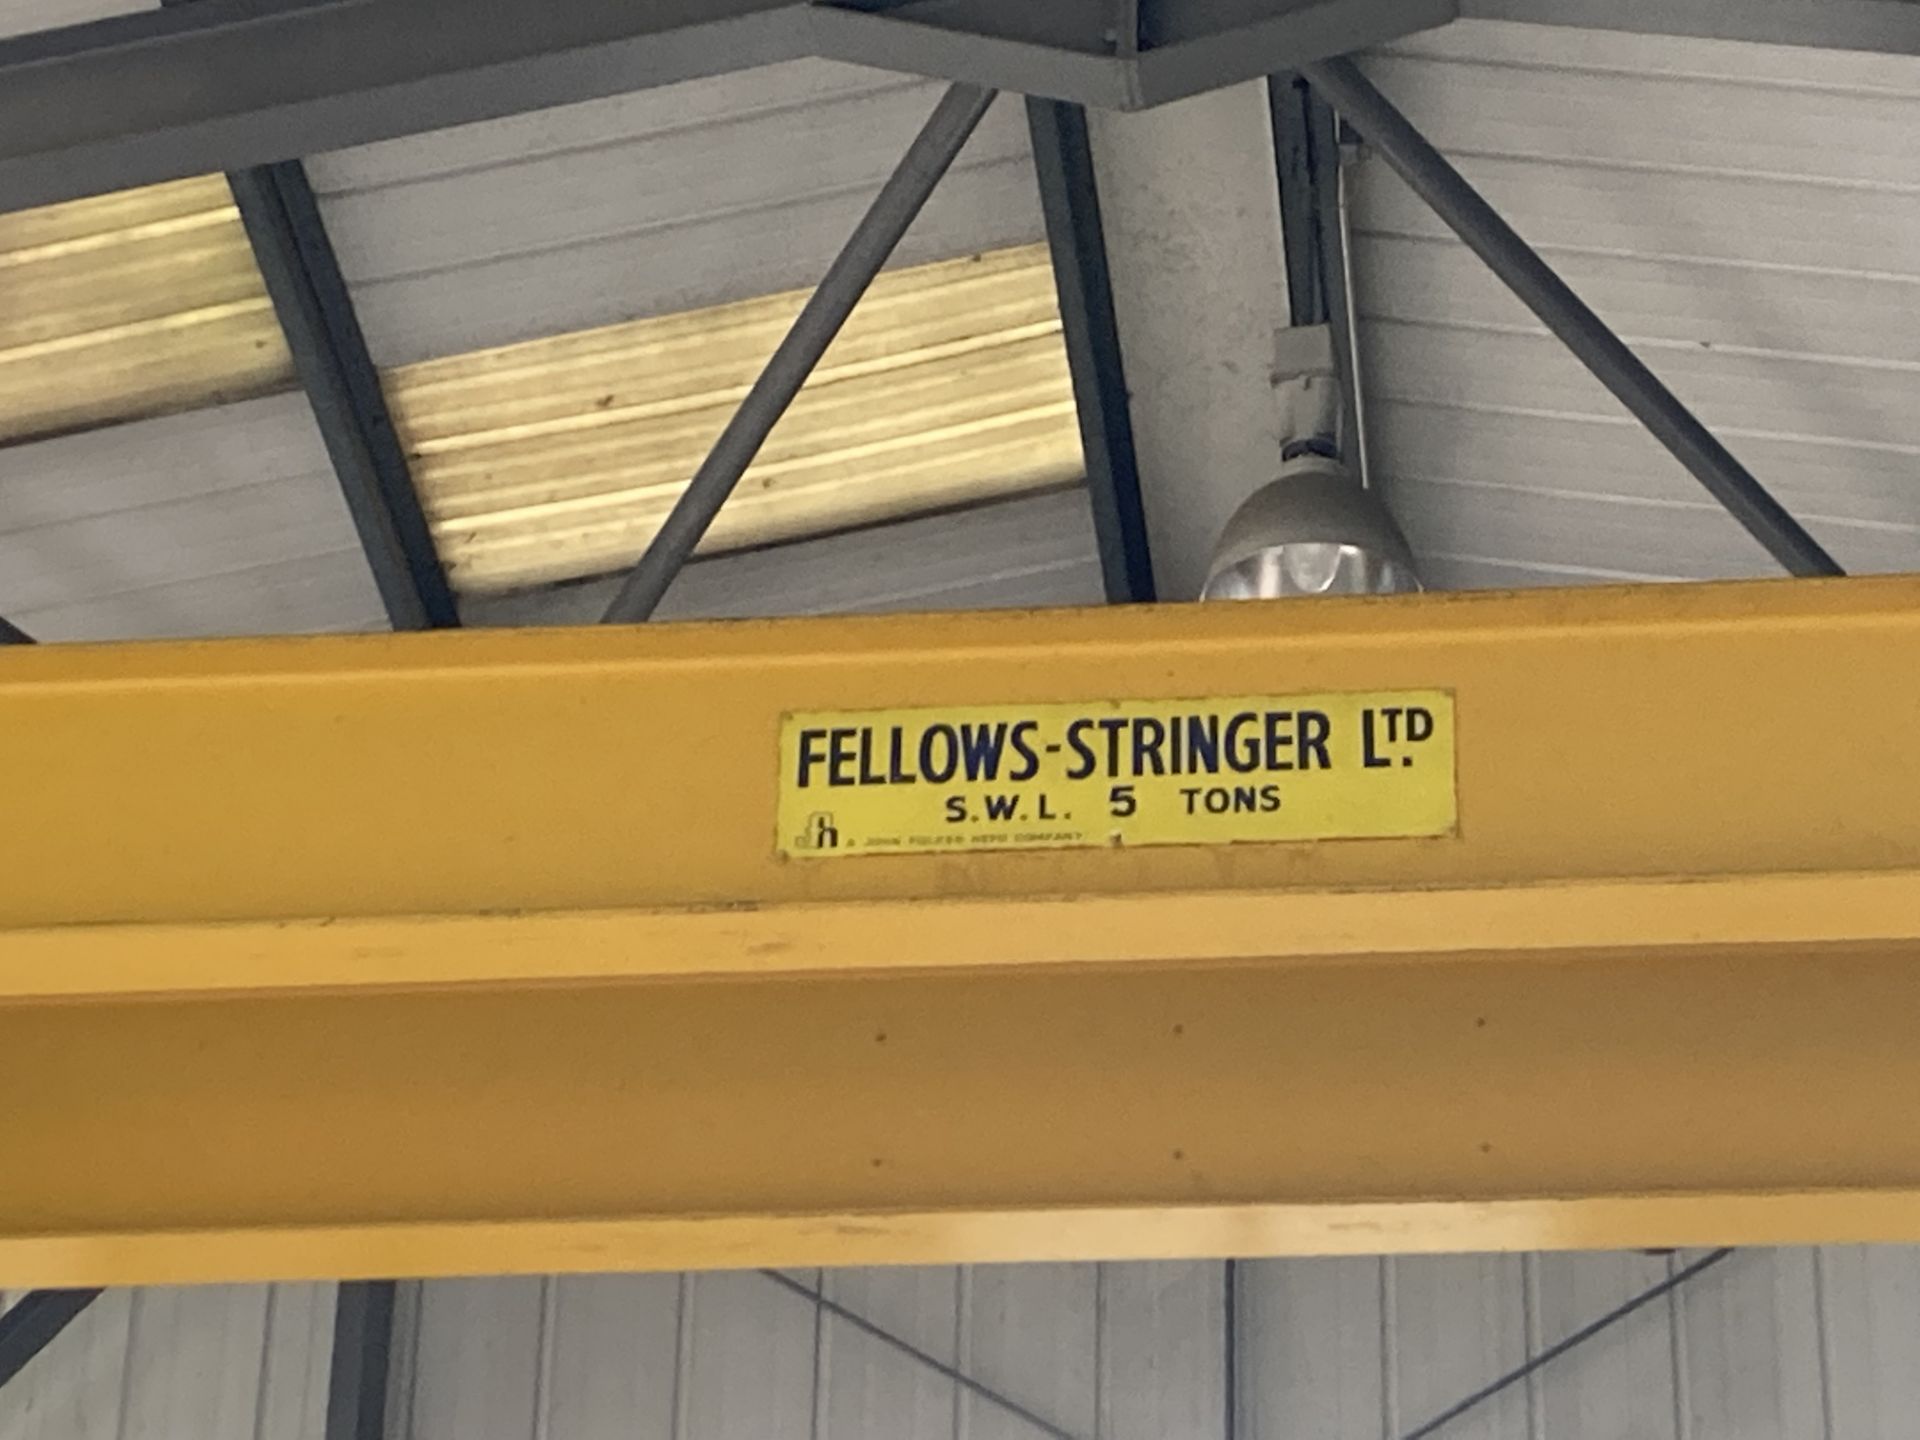 Fellows-Stringer 5 TON TWIN GIRDER OVERHEAD TRAVELLING CRANE, approx. width of crane – 10.73m x - Image 5 of 11